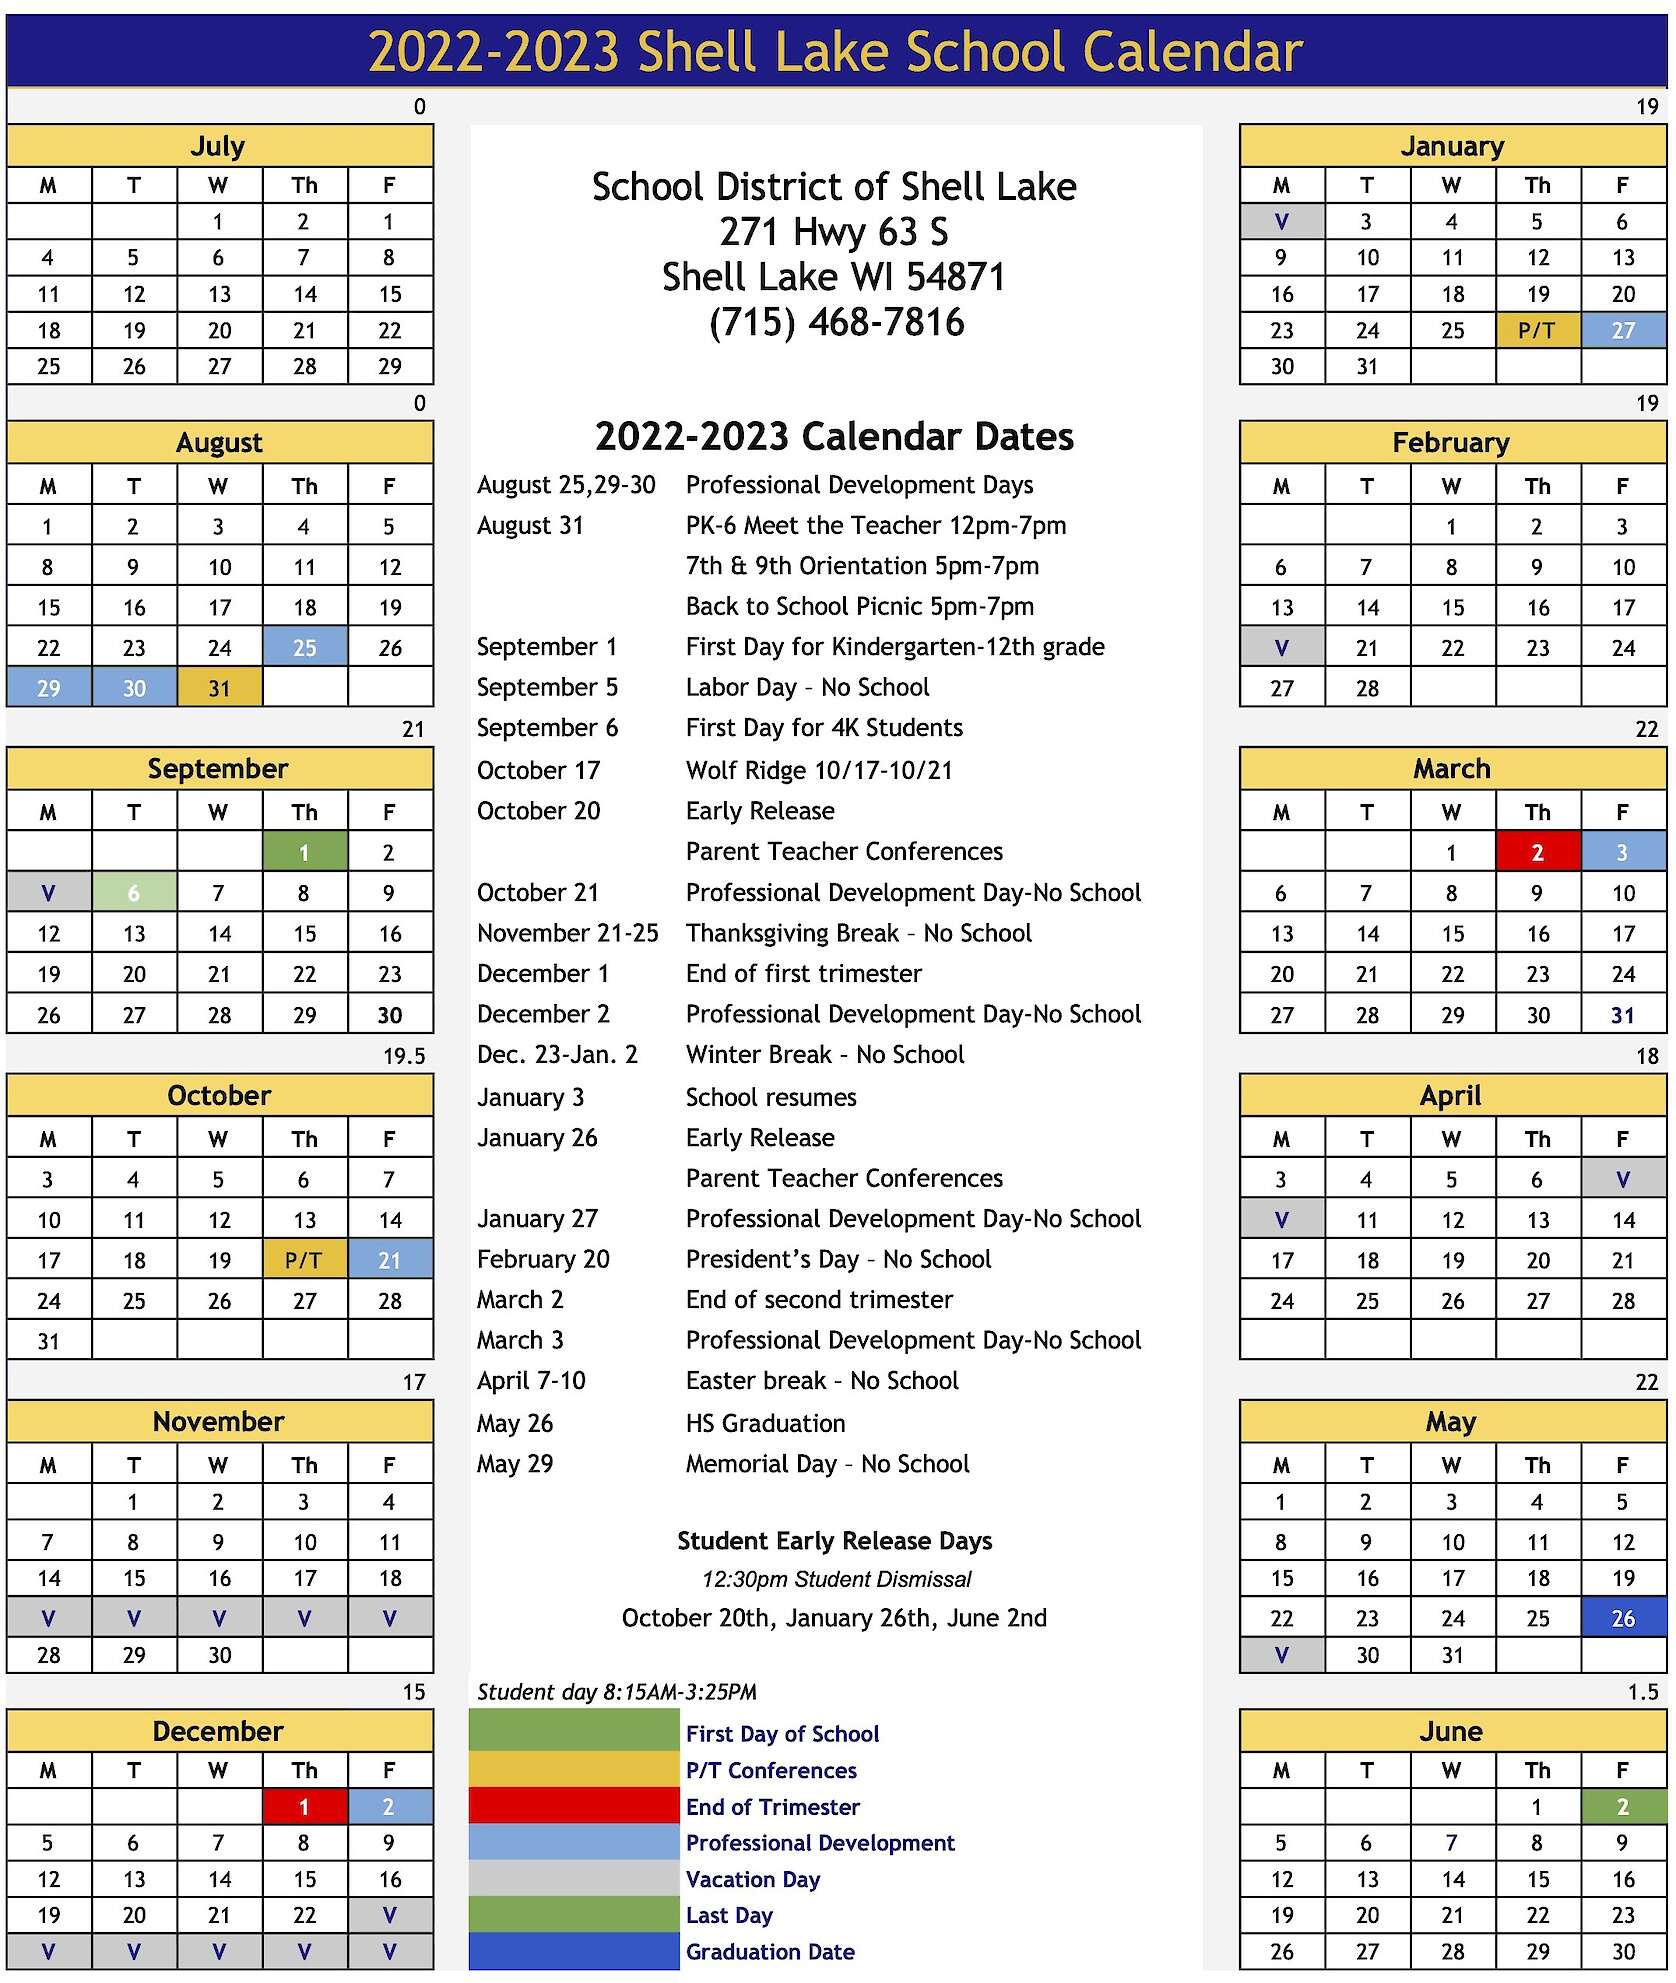 2022-2023 School Calendar Included In This Week’s Shell Lake Laker News